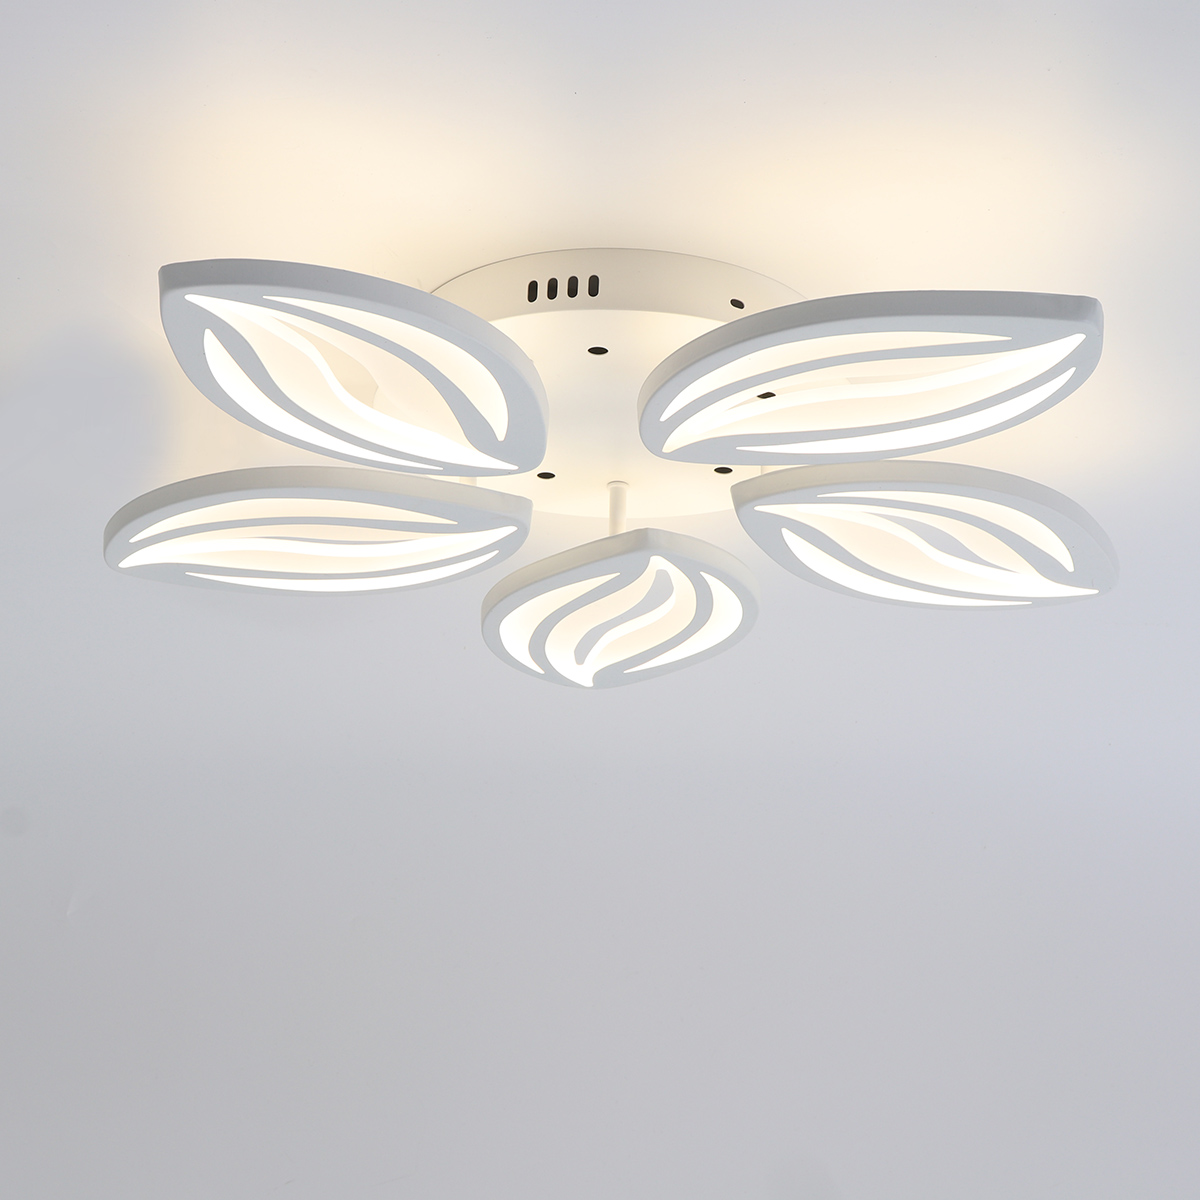 AC110-220V-6000LM-550LED-Ceiling-Light-Fixture-Lamp-Remote-Control-Bedroom-Study-Parlor-1807229-10